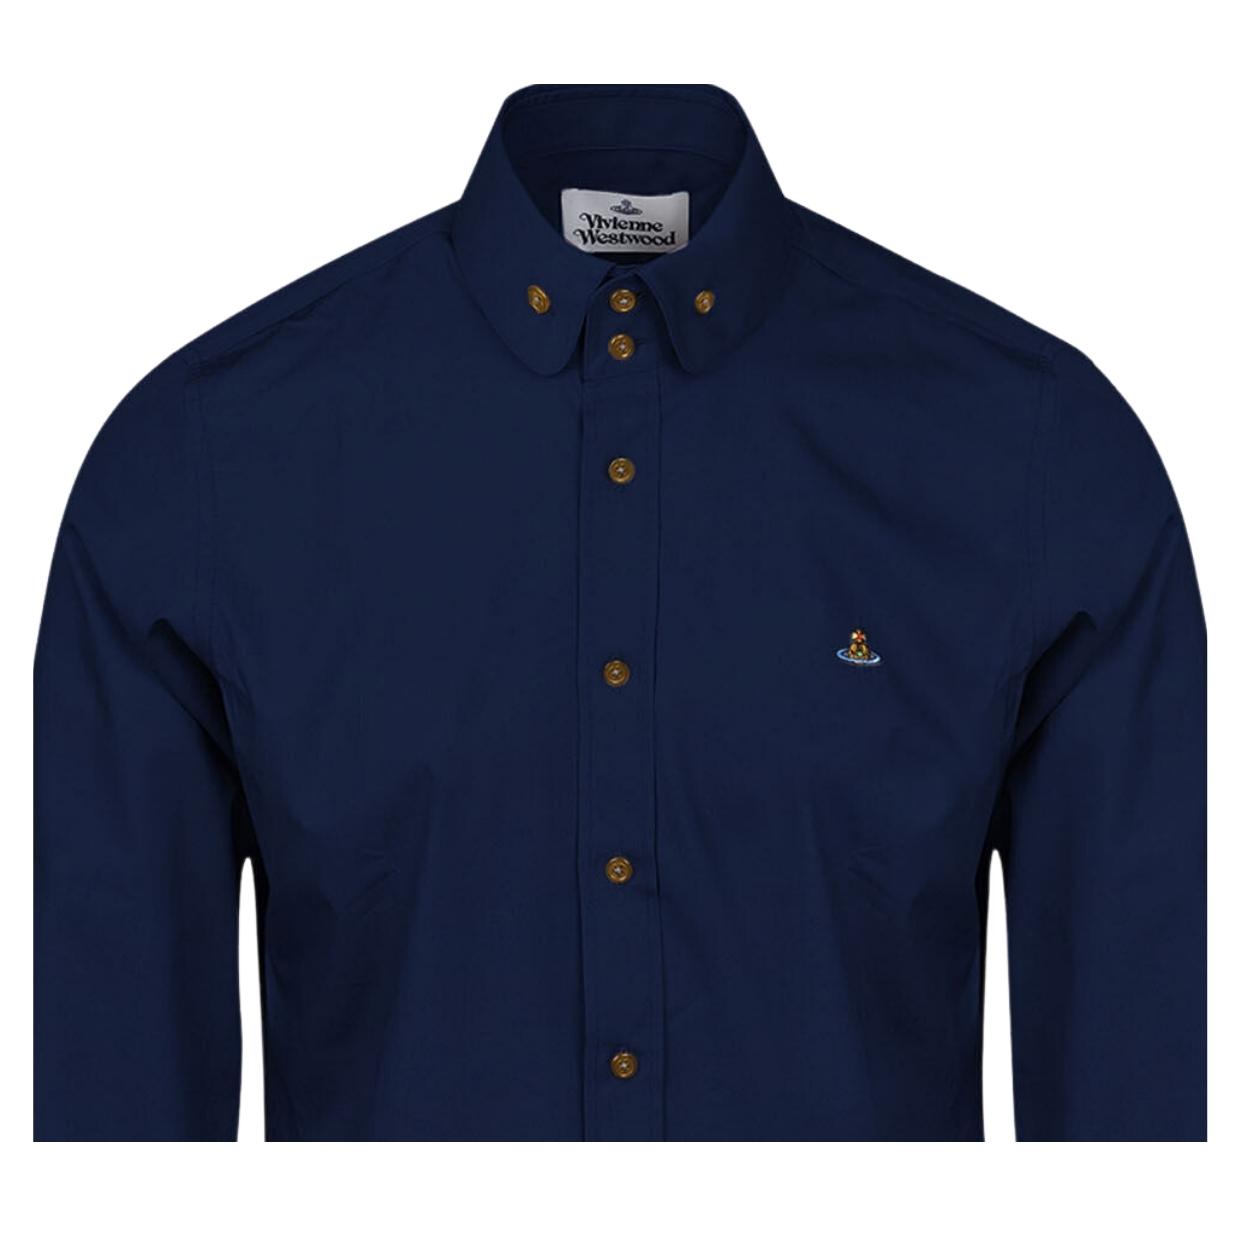 Vivienne Westwood Two Button Krall Long Sleeve Navy Shirt